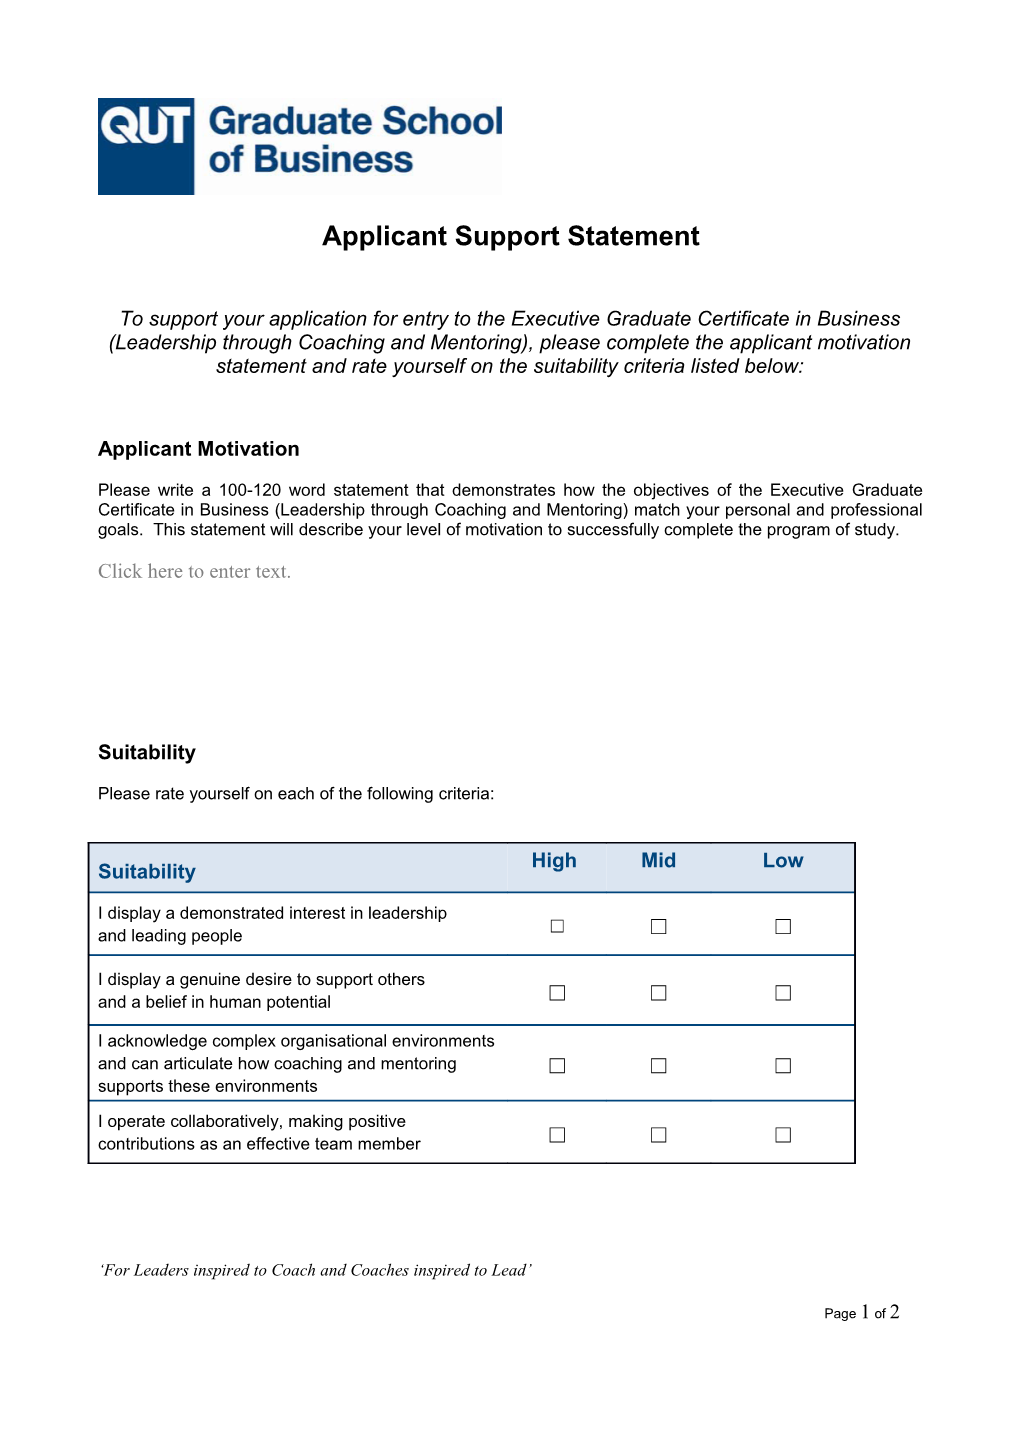 Applicant Support Statement